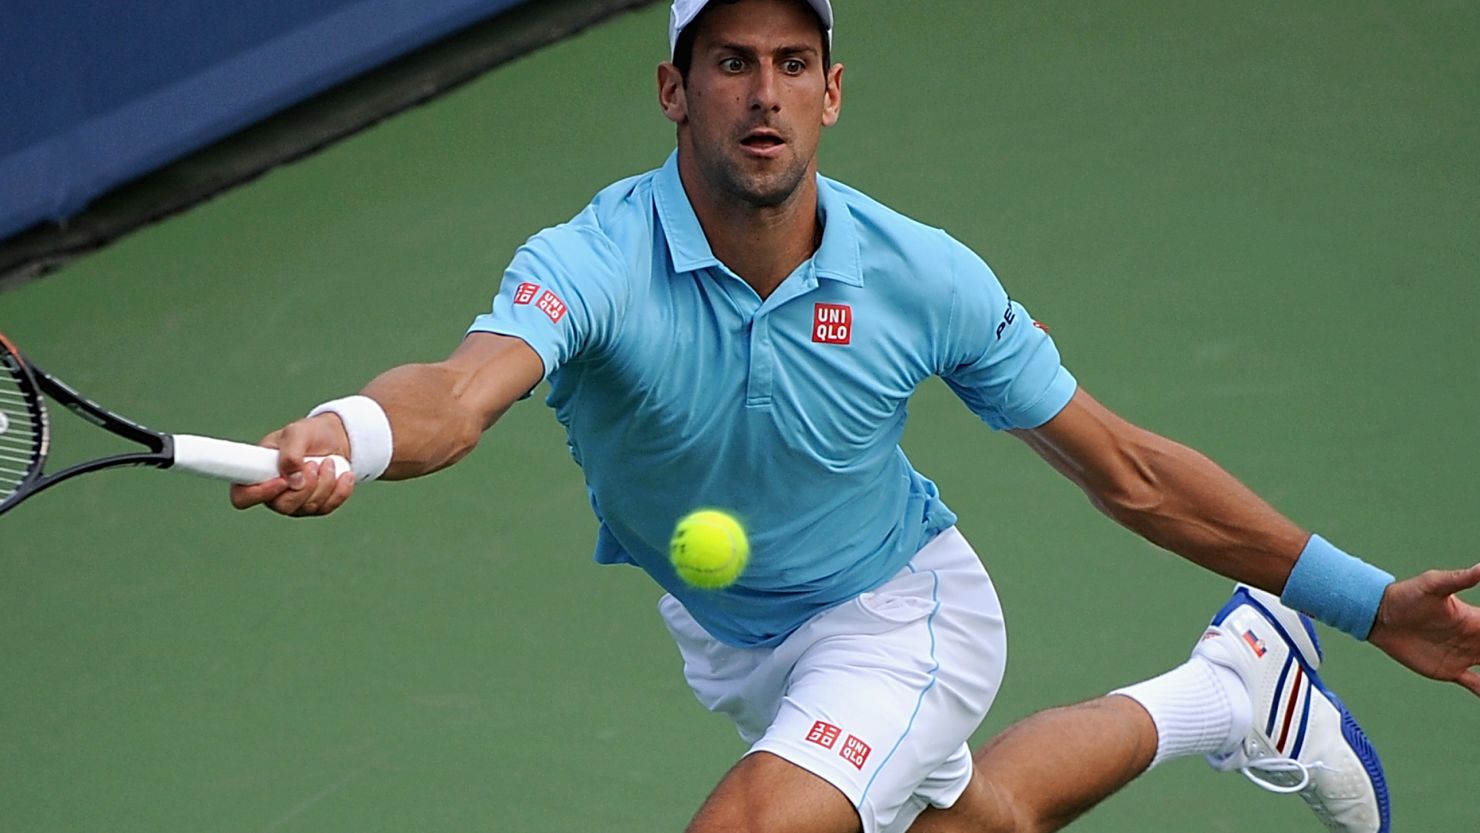 Novak Djokovic at full stretch during his third round defeat to Tommy Robredo in Cincinnati.